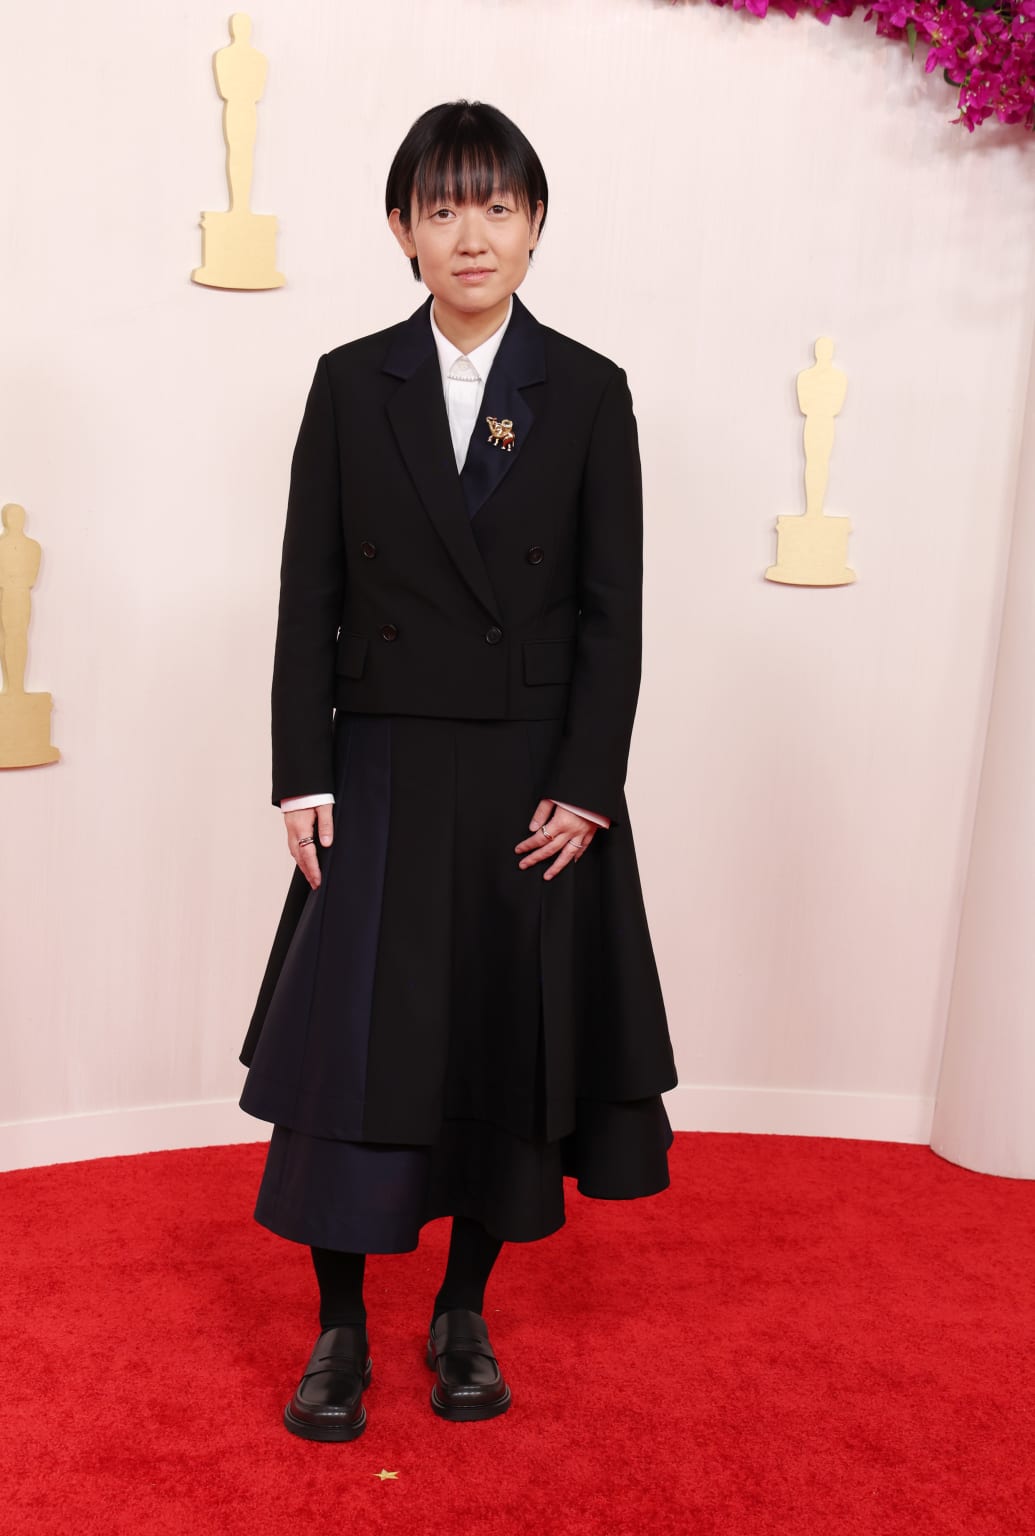 Celine Song at the Oscars